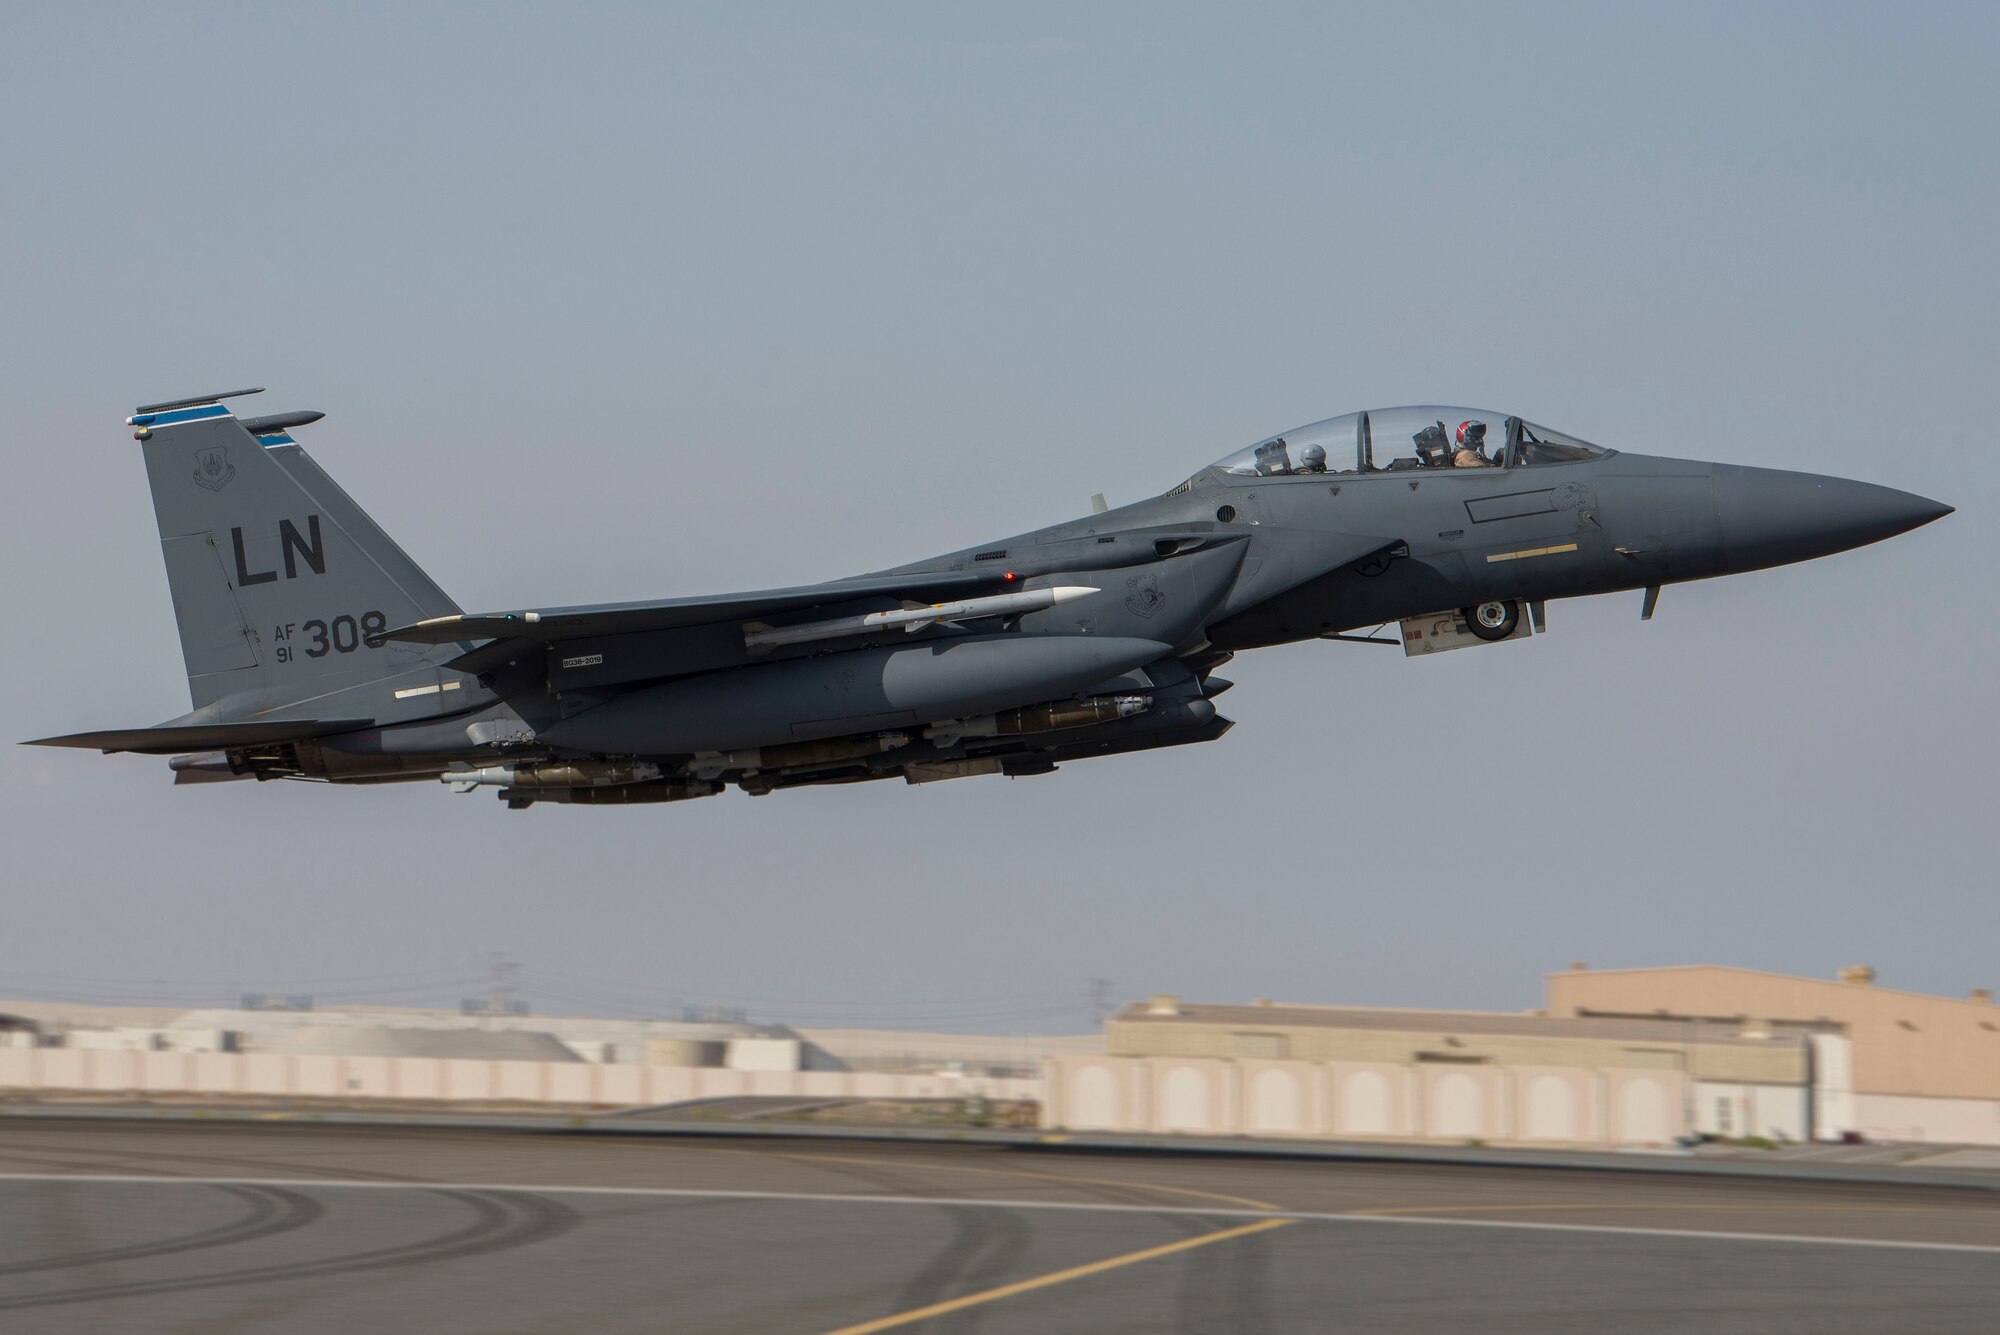 A U.S. Air Force F-15E Strike Eagle from the 494th Expeditionary Fighter Squadron (EFS) takes off from Al Dhafra Air Base, United Arab Emirates, in support of regional security operations, April 30, 2021.